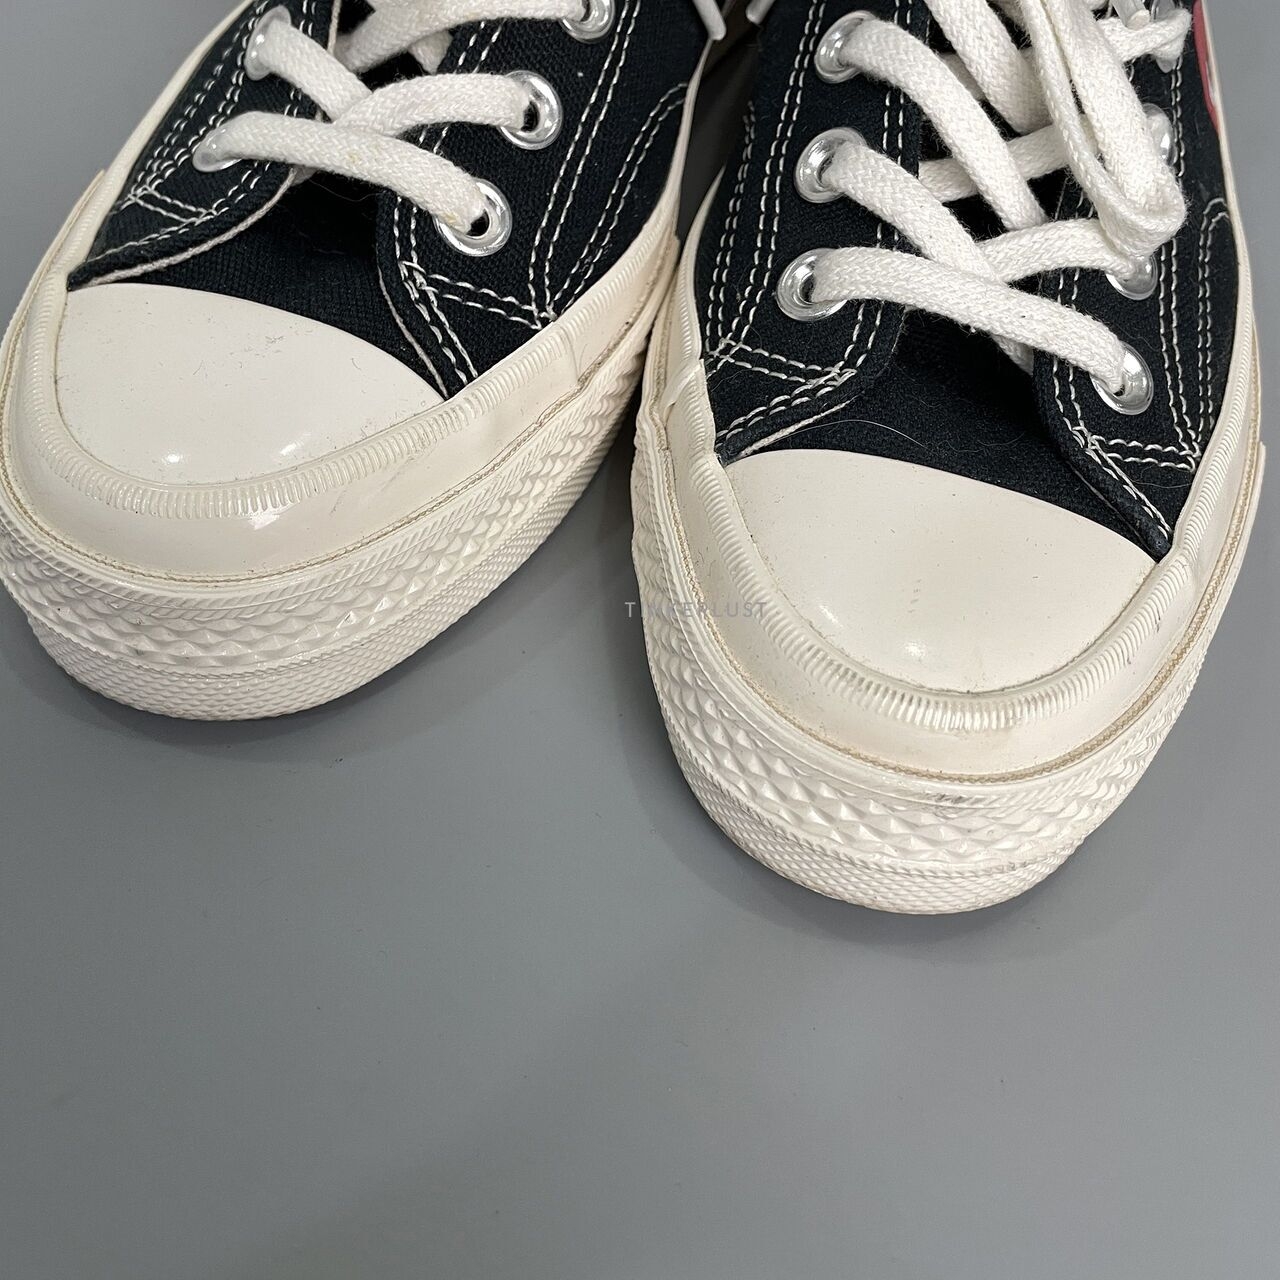 Converse Black CT 70 Low x Play Comme Des Garcons Sneakers